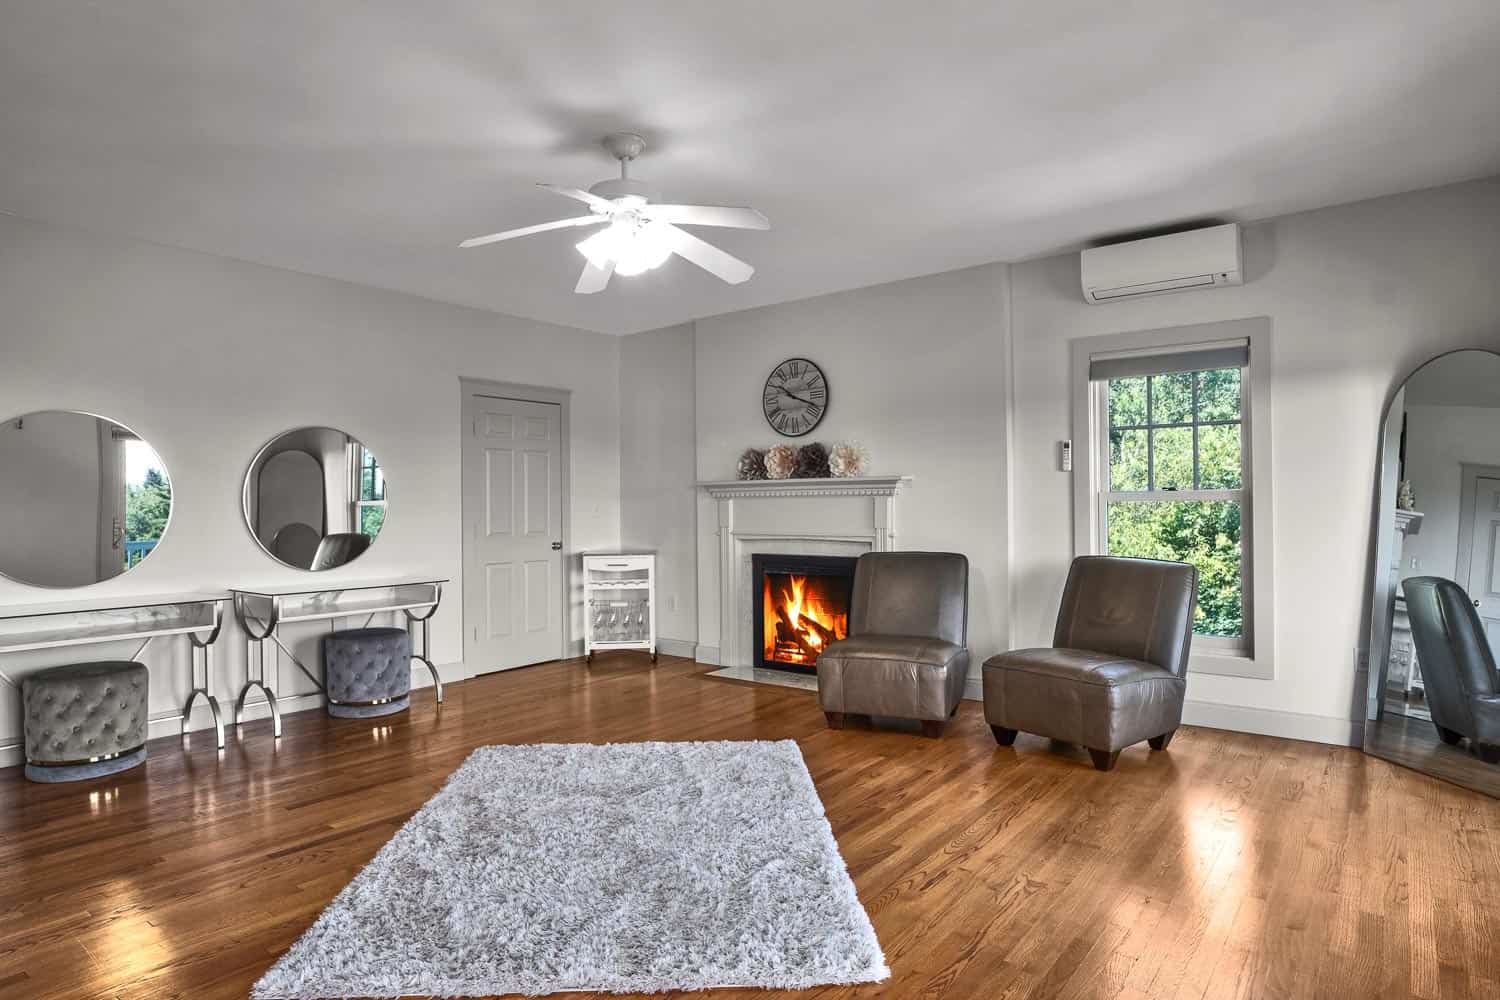 A spacious living room with a white rug, two grey armchairs, a lit fireplace, and multiple mirrors on the walls.